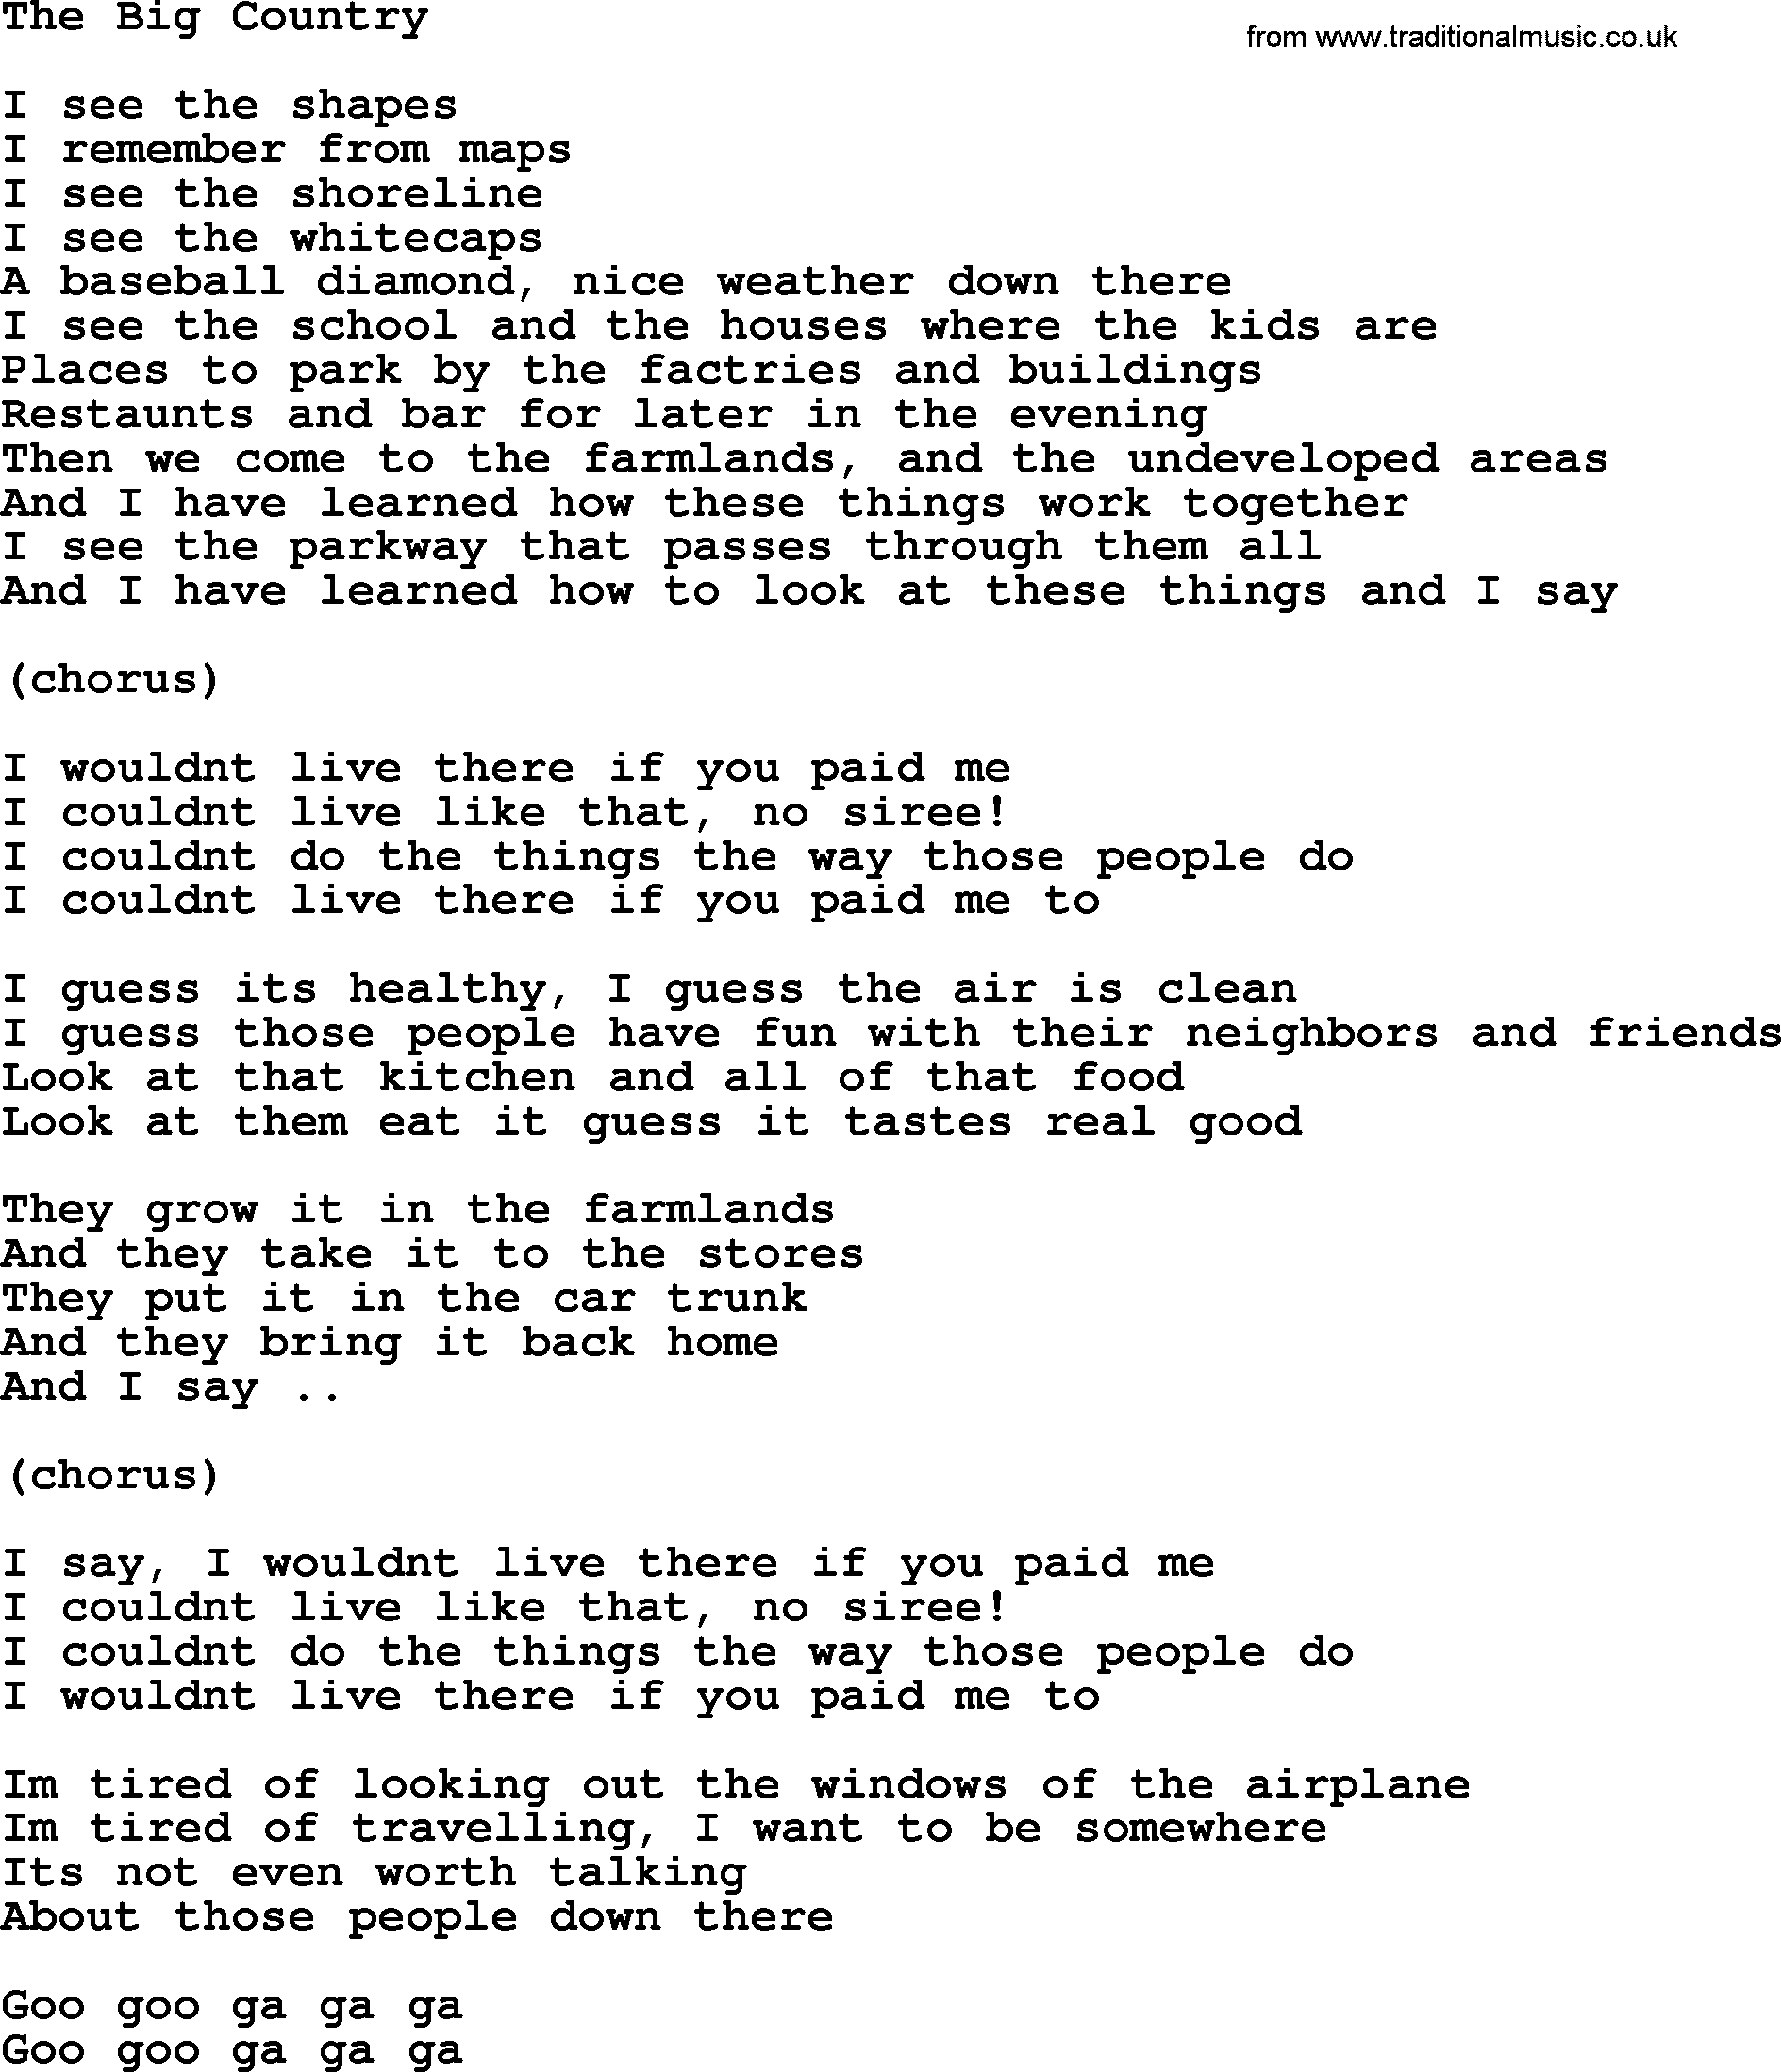 The Byrds song The Big Country, lyrics